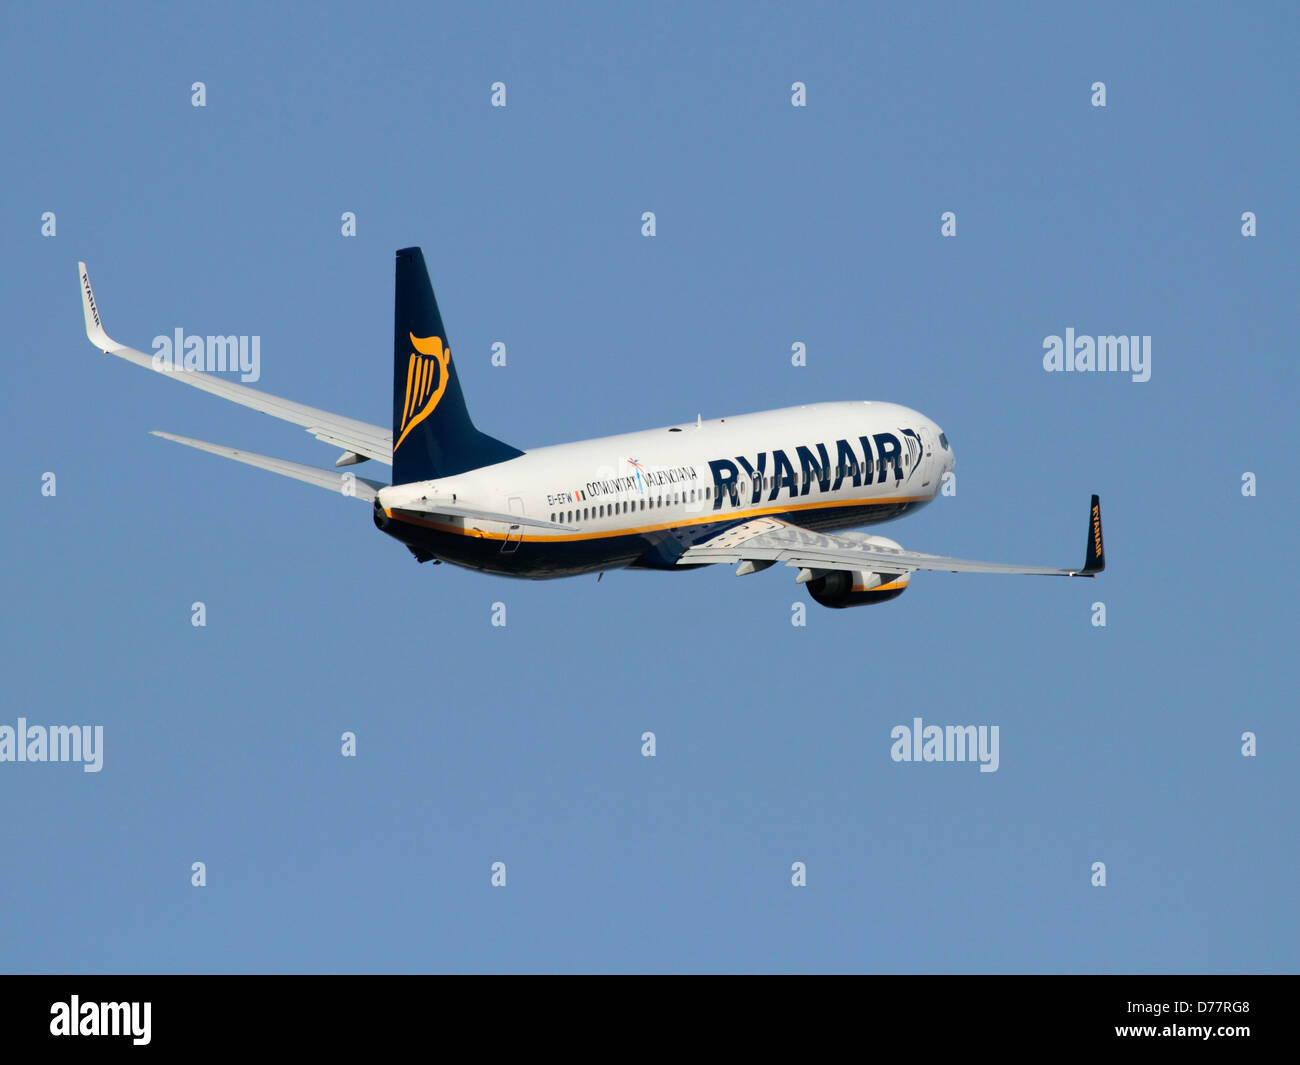 Ryanair plane. Economy air travel. Boeing 737-800 airliner belonging to low-cost airline Ryanair in flight after takeoff. Stock Photo